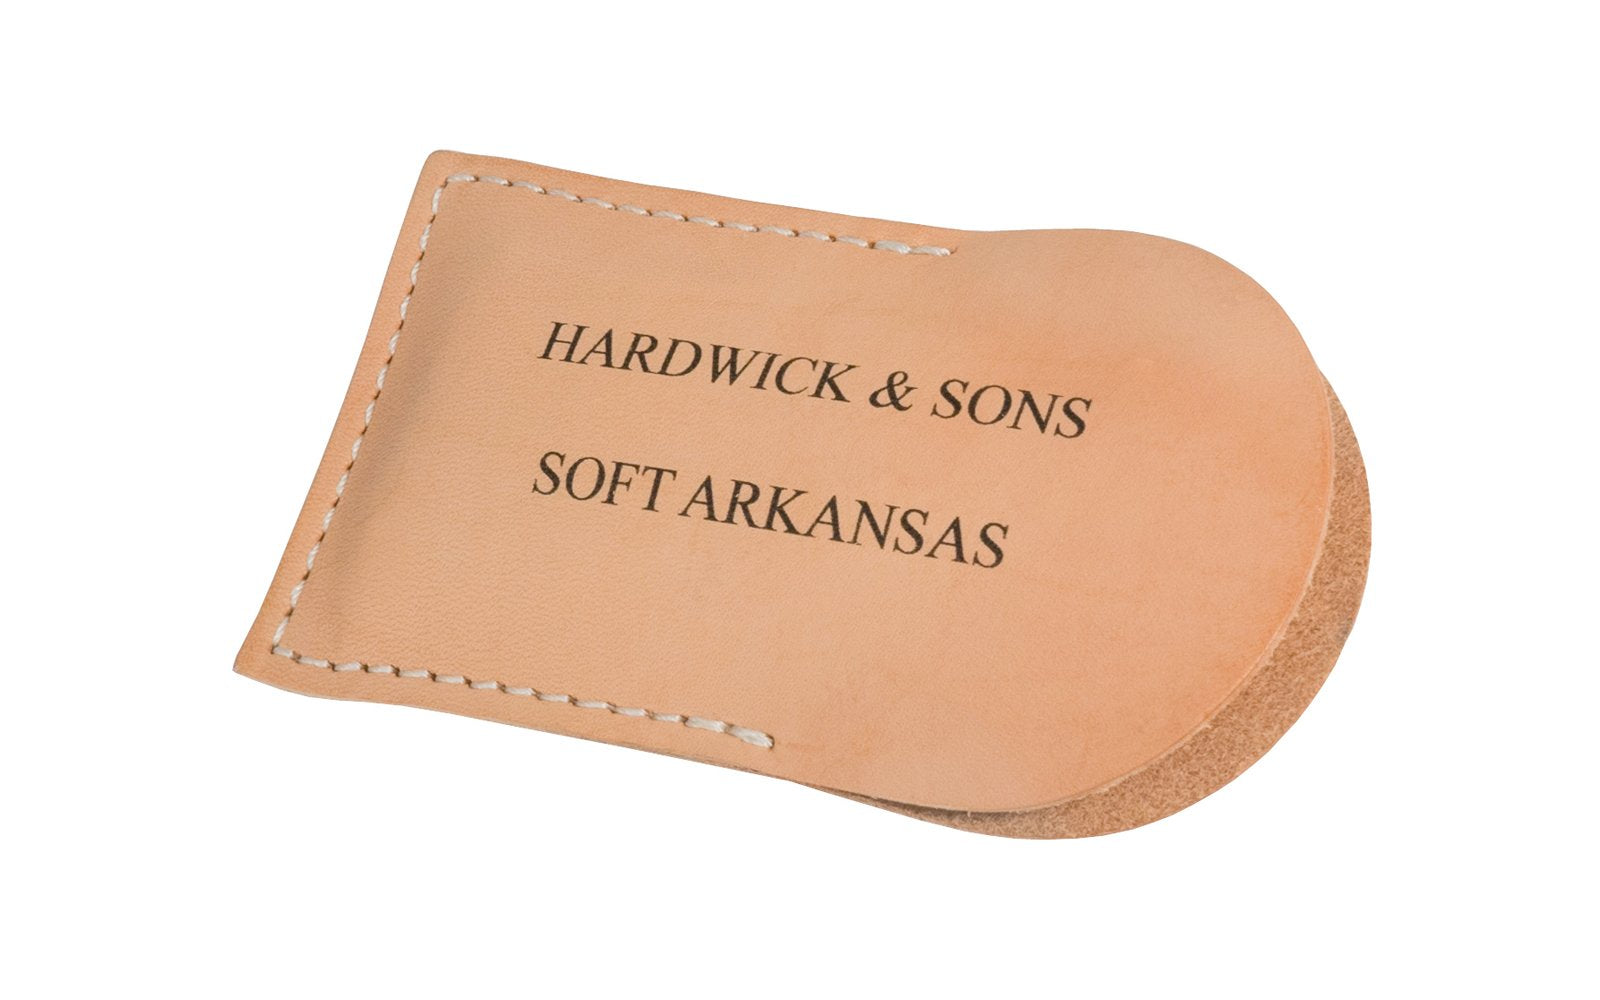 Soft Arkansas Slip Stone with Leather Pouch ~ 4-1/4" x 1-5/8" - Made in USA ~ Extra Fine Stone ~ least dense & coarsest grained of the natural Arkansas stones & good for starting an edge on your tools & knives; commonly used after synthetic or oil stone - Model No. MAP-42-L